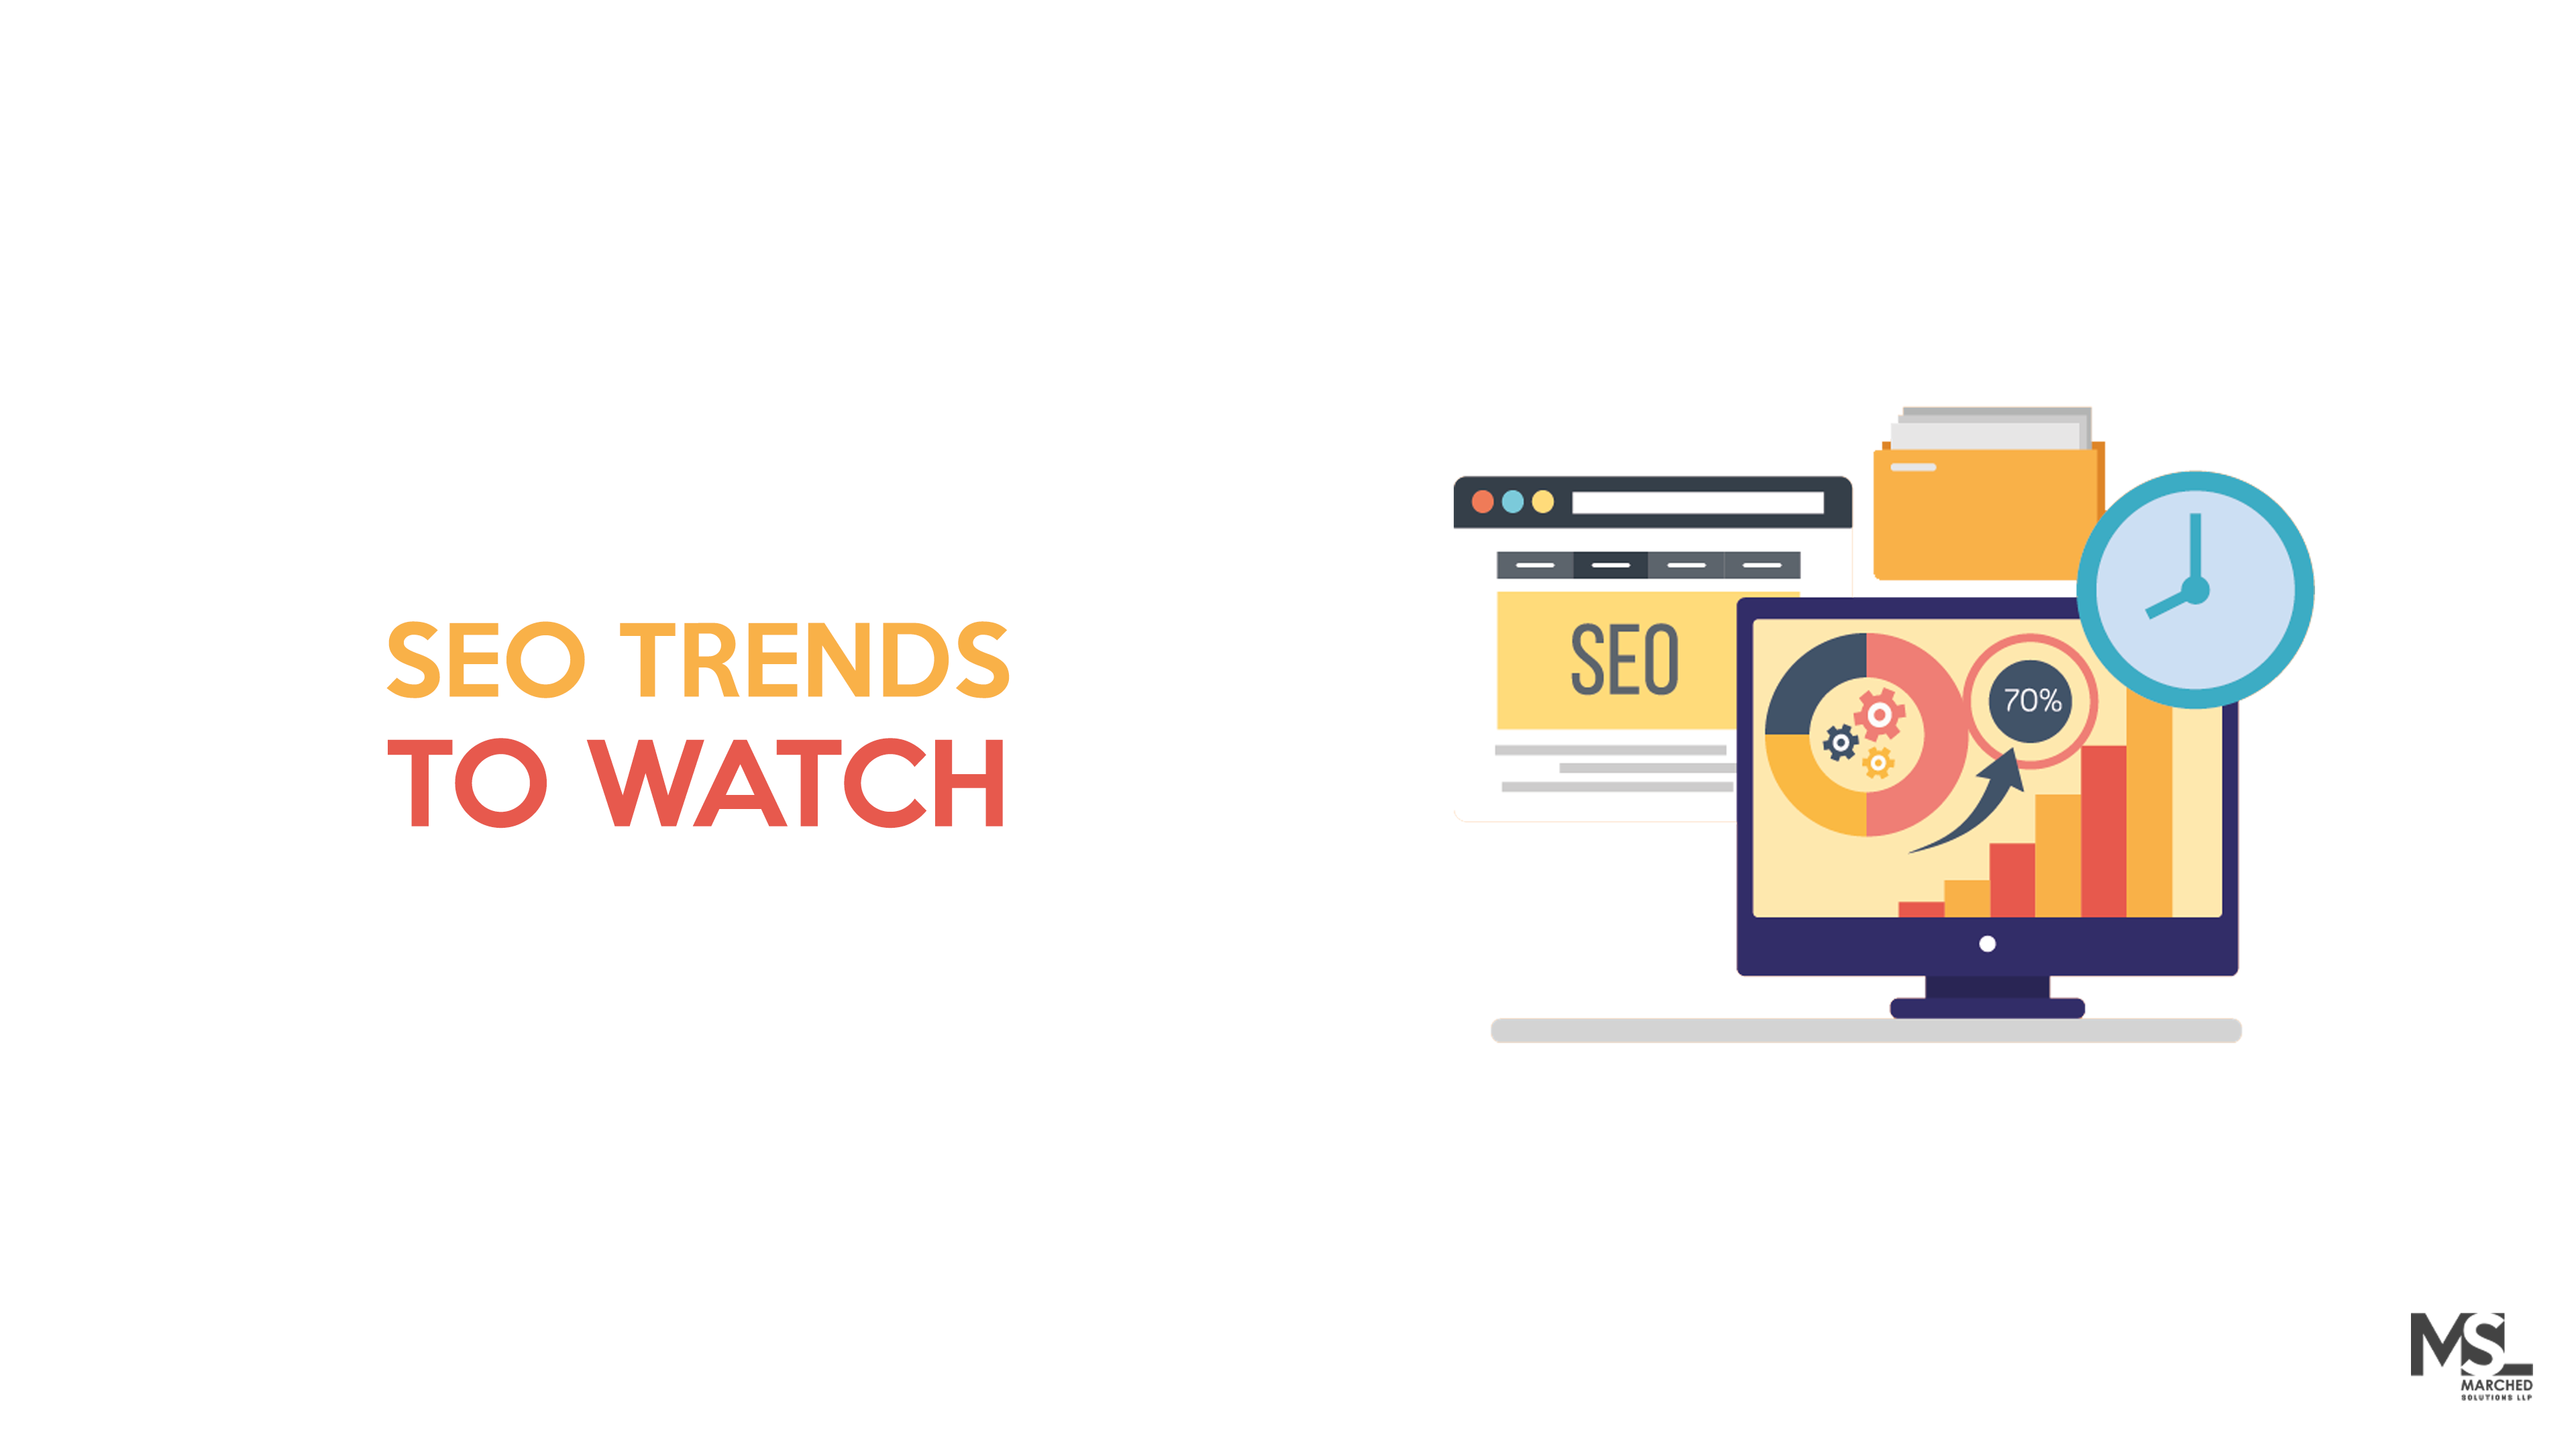 SEO trends to watch in 2021